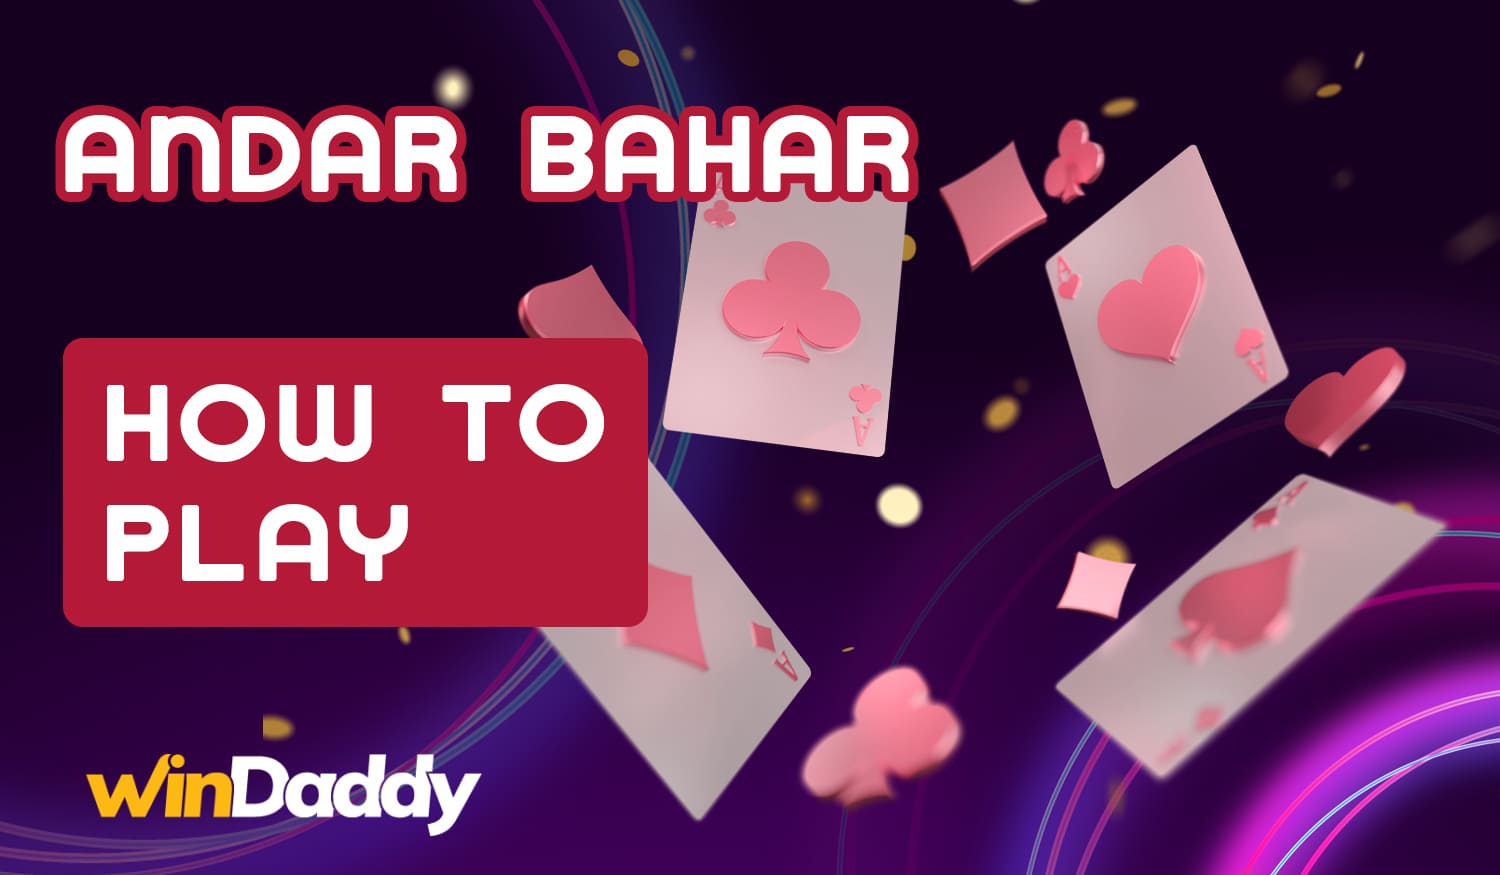 Instructions for new Windaddy users on how to start playing Andar Bahar